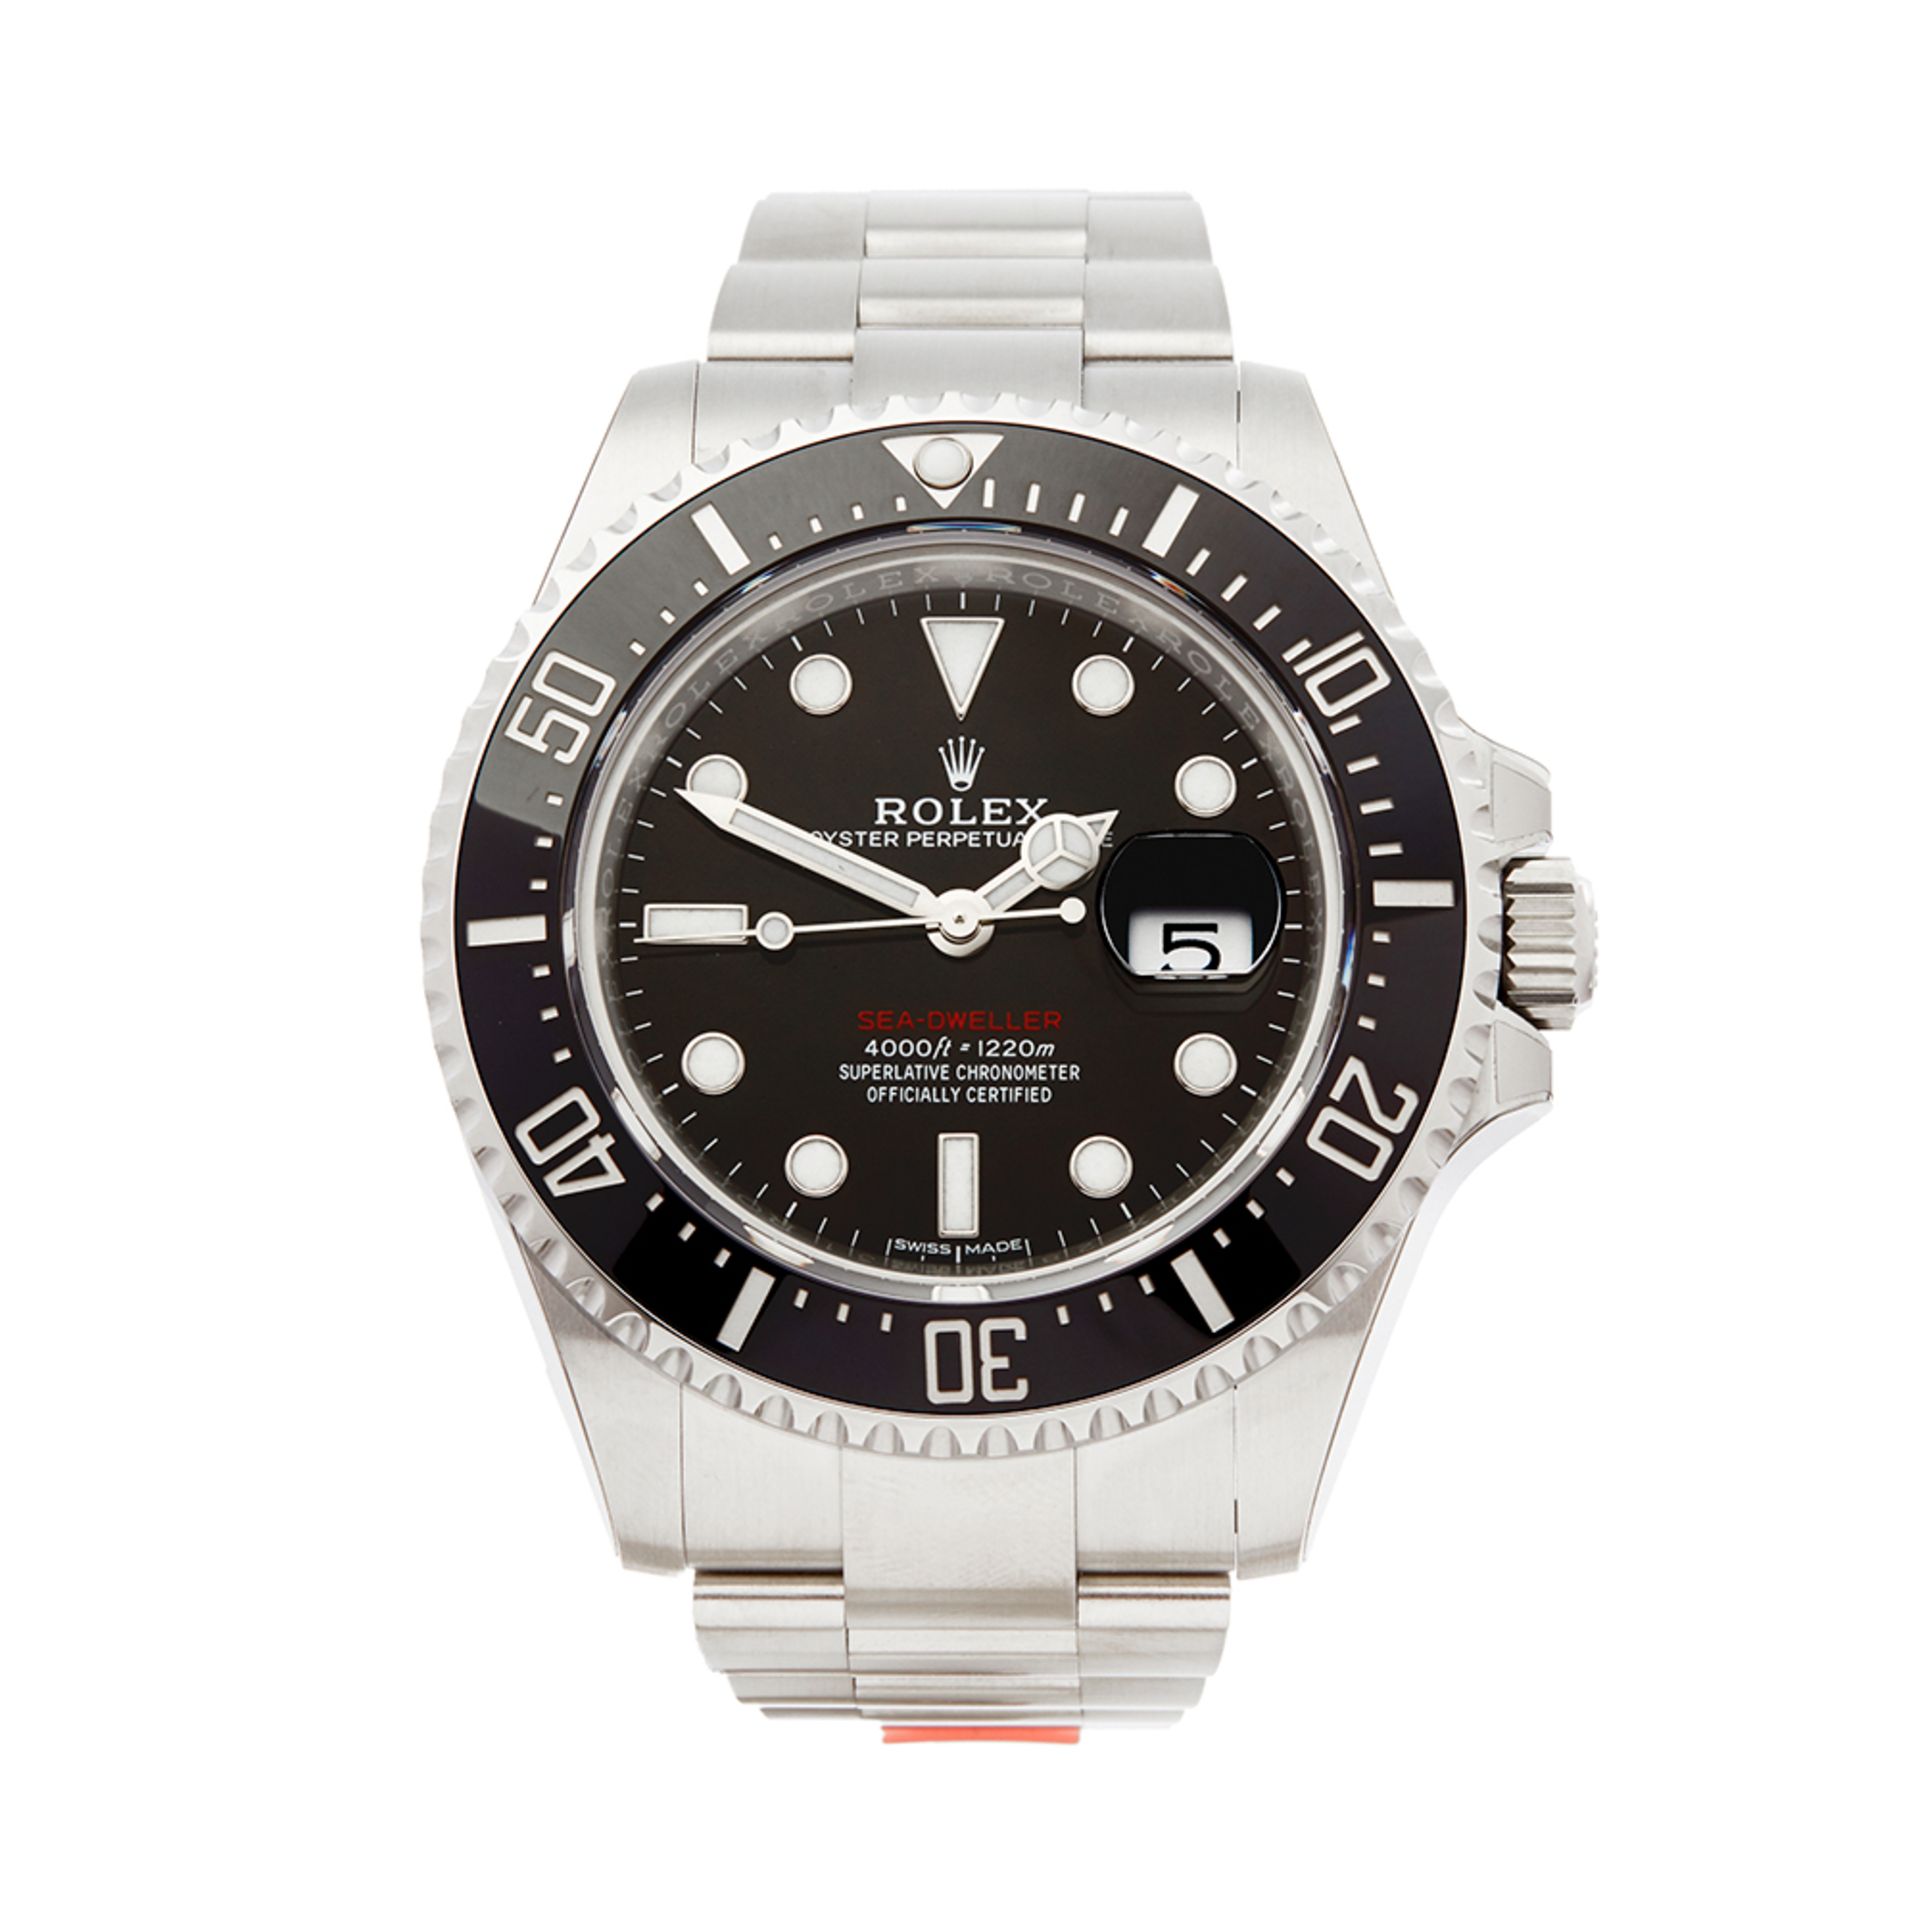 Rolex Sea-Dweller Anniversary Stainless Steel - 126600 - Image 2 of 7